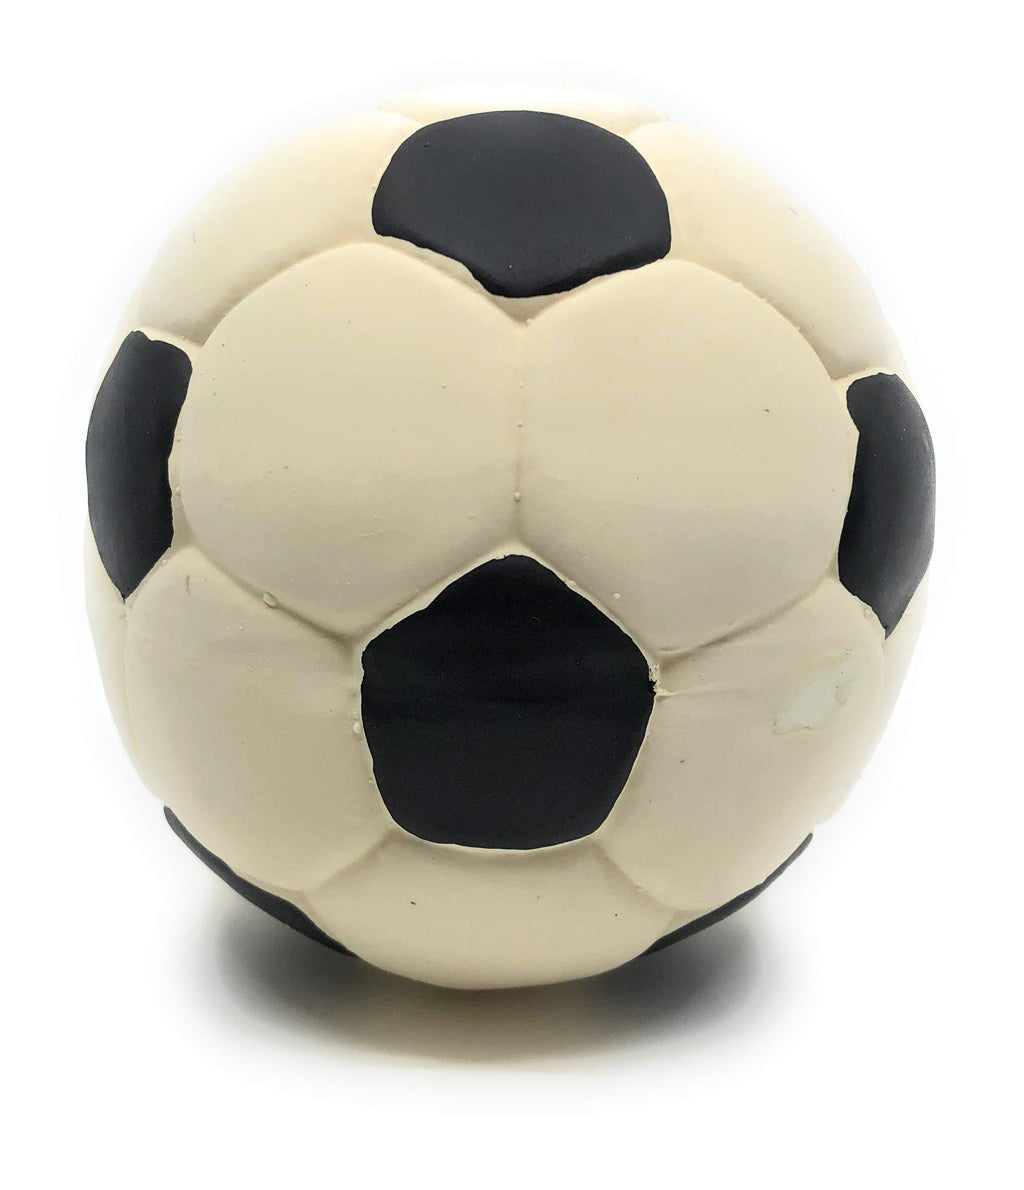 [Australia] - Large Soccer Ball - Soft, Squeaky Dog Toy - Natural Rubber (Latex) - for Large Breed Dogs & Senior Dogs - 5" Diameter - Complies with Same Safety Standards as Children's Toys 